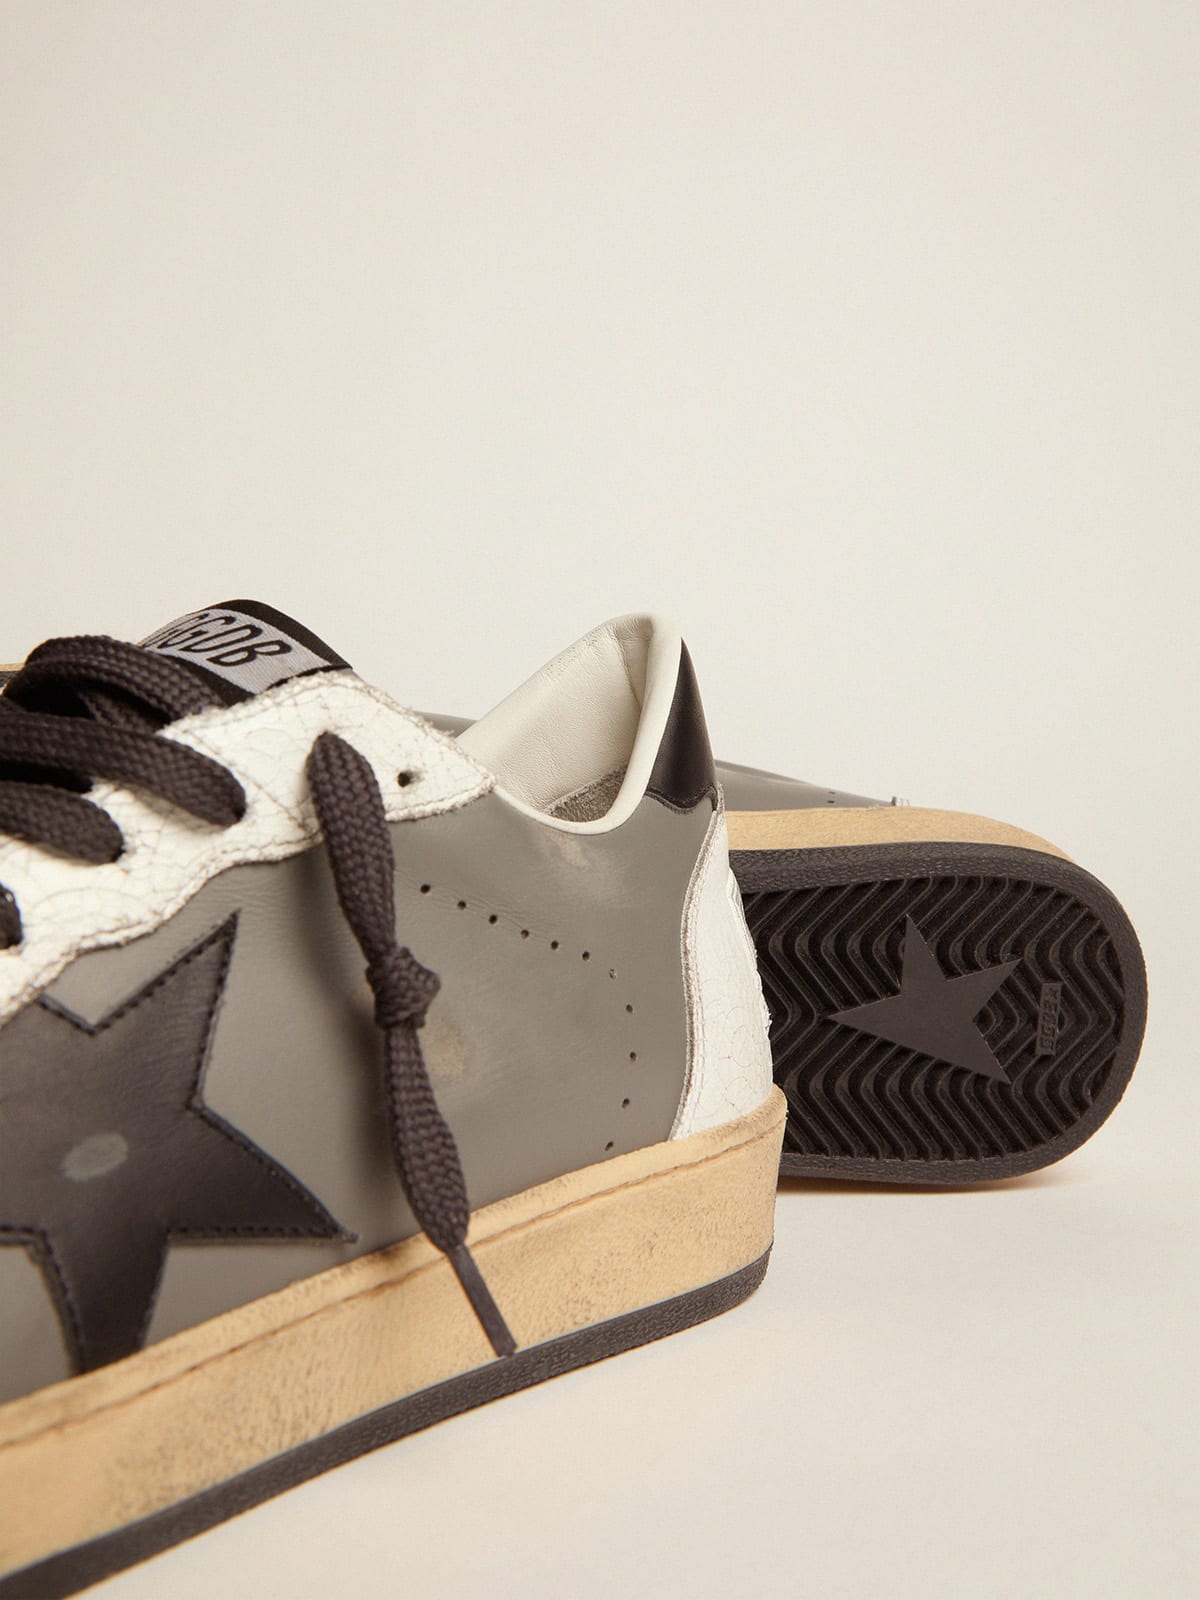 Golden Goose - Ball Star in gray leather with a black leather star and heel tab in 